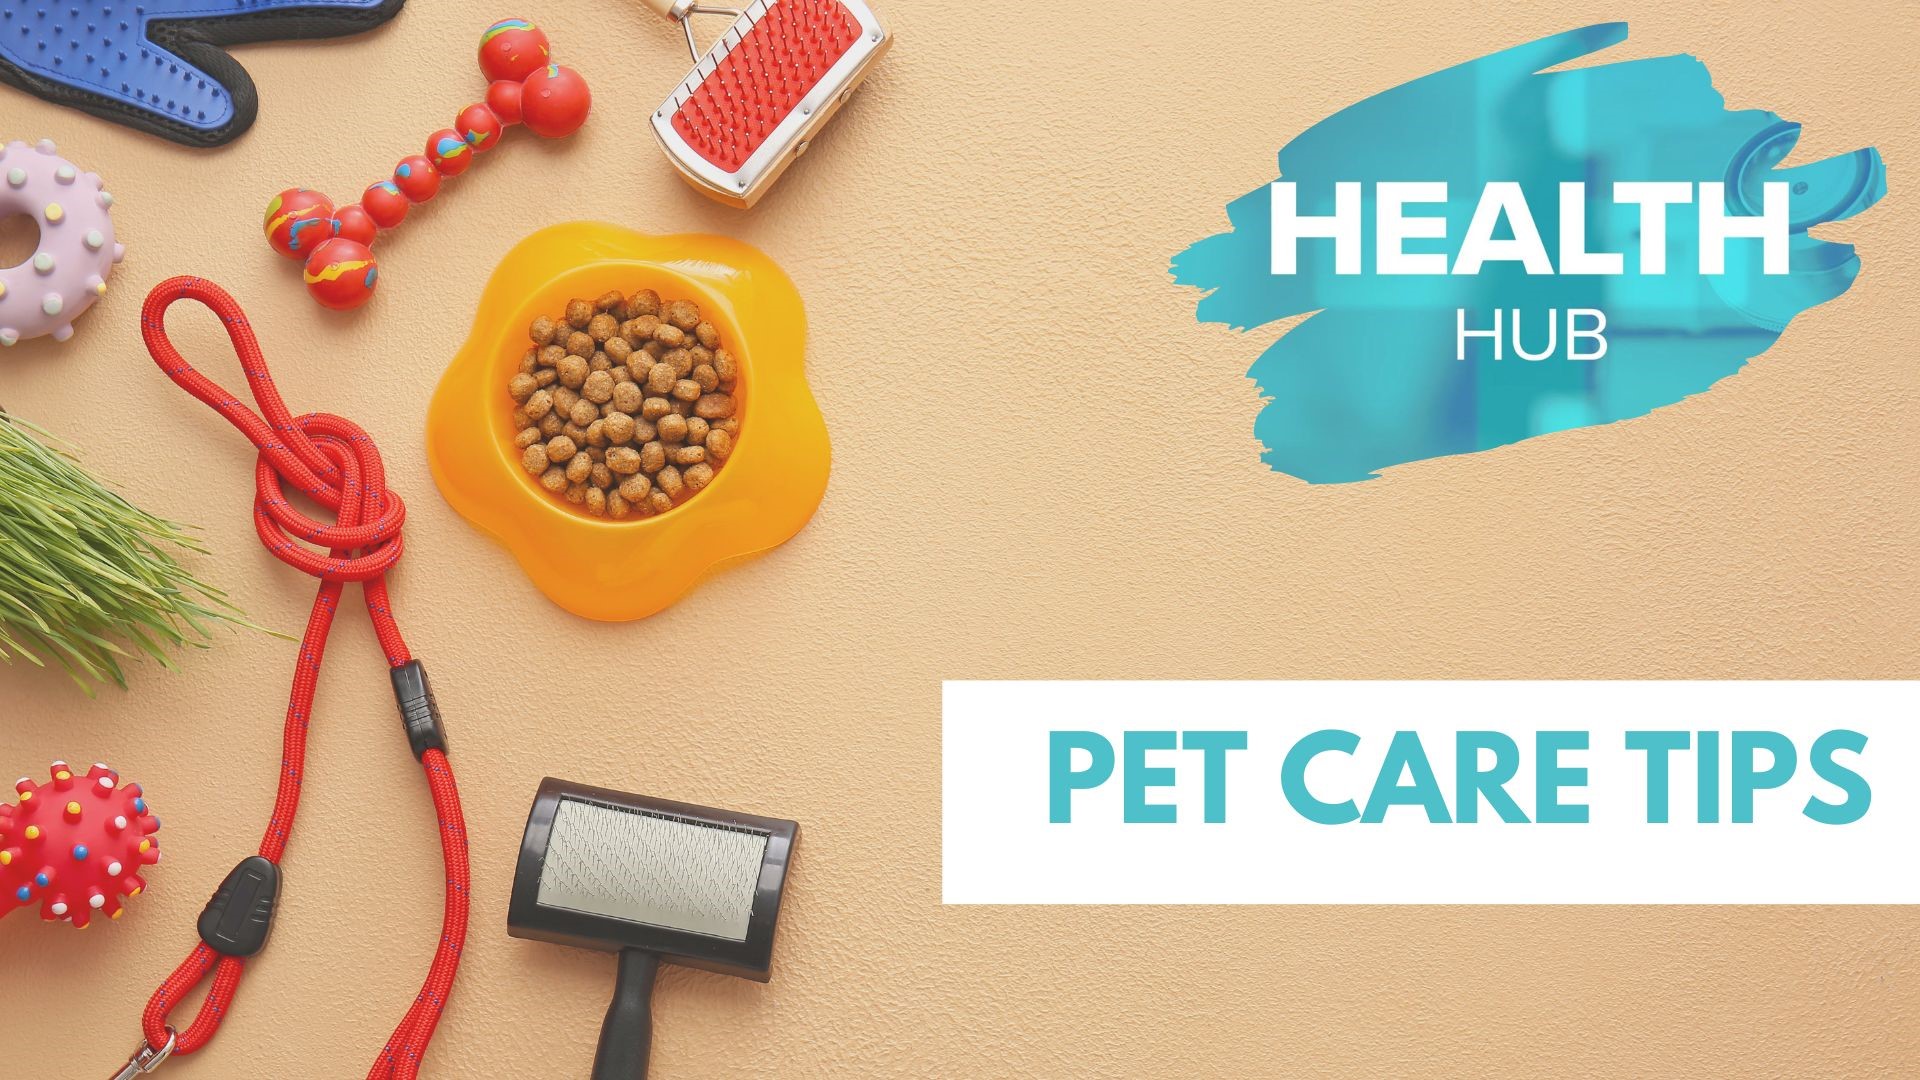 Important tips to keep your pet healthy from pet care bills to food.